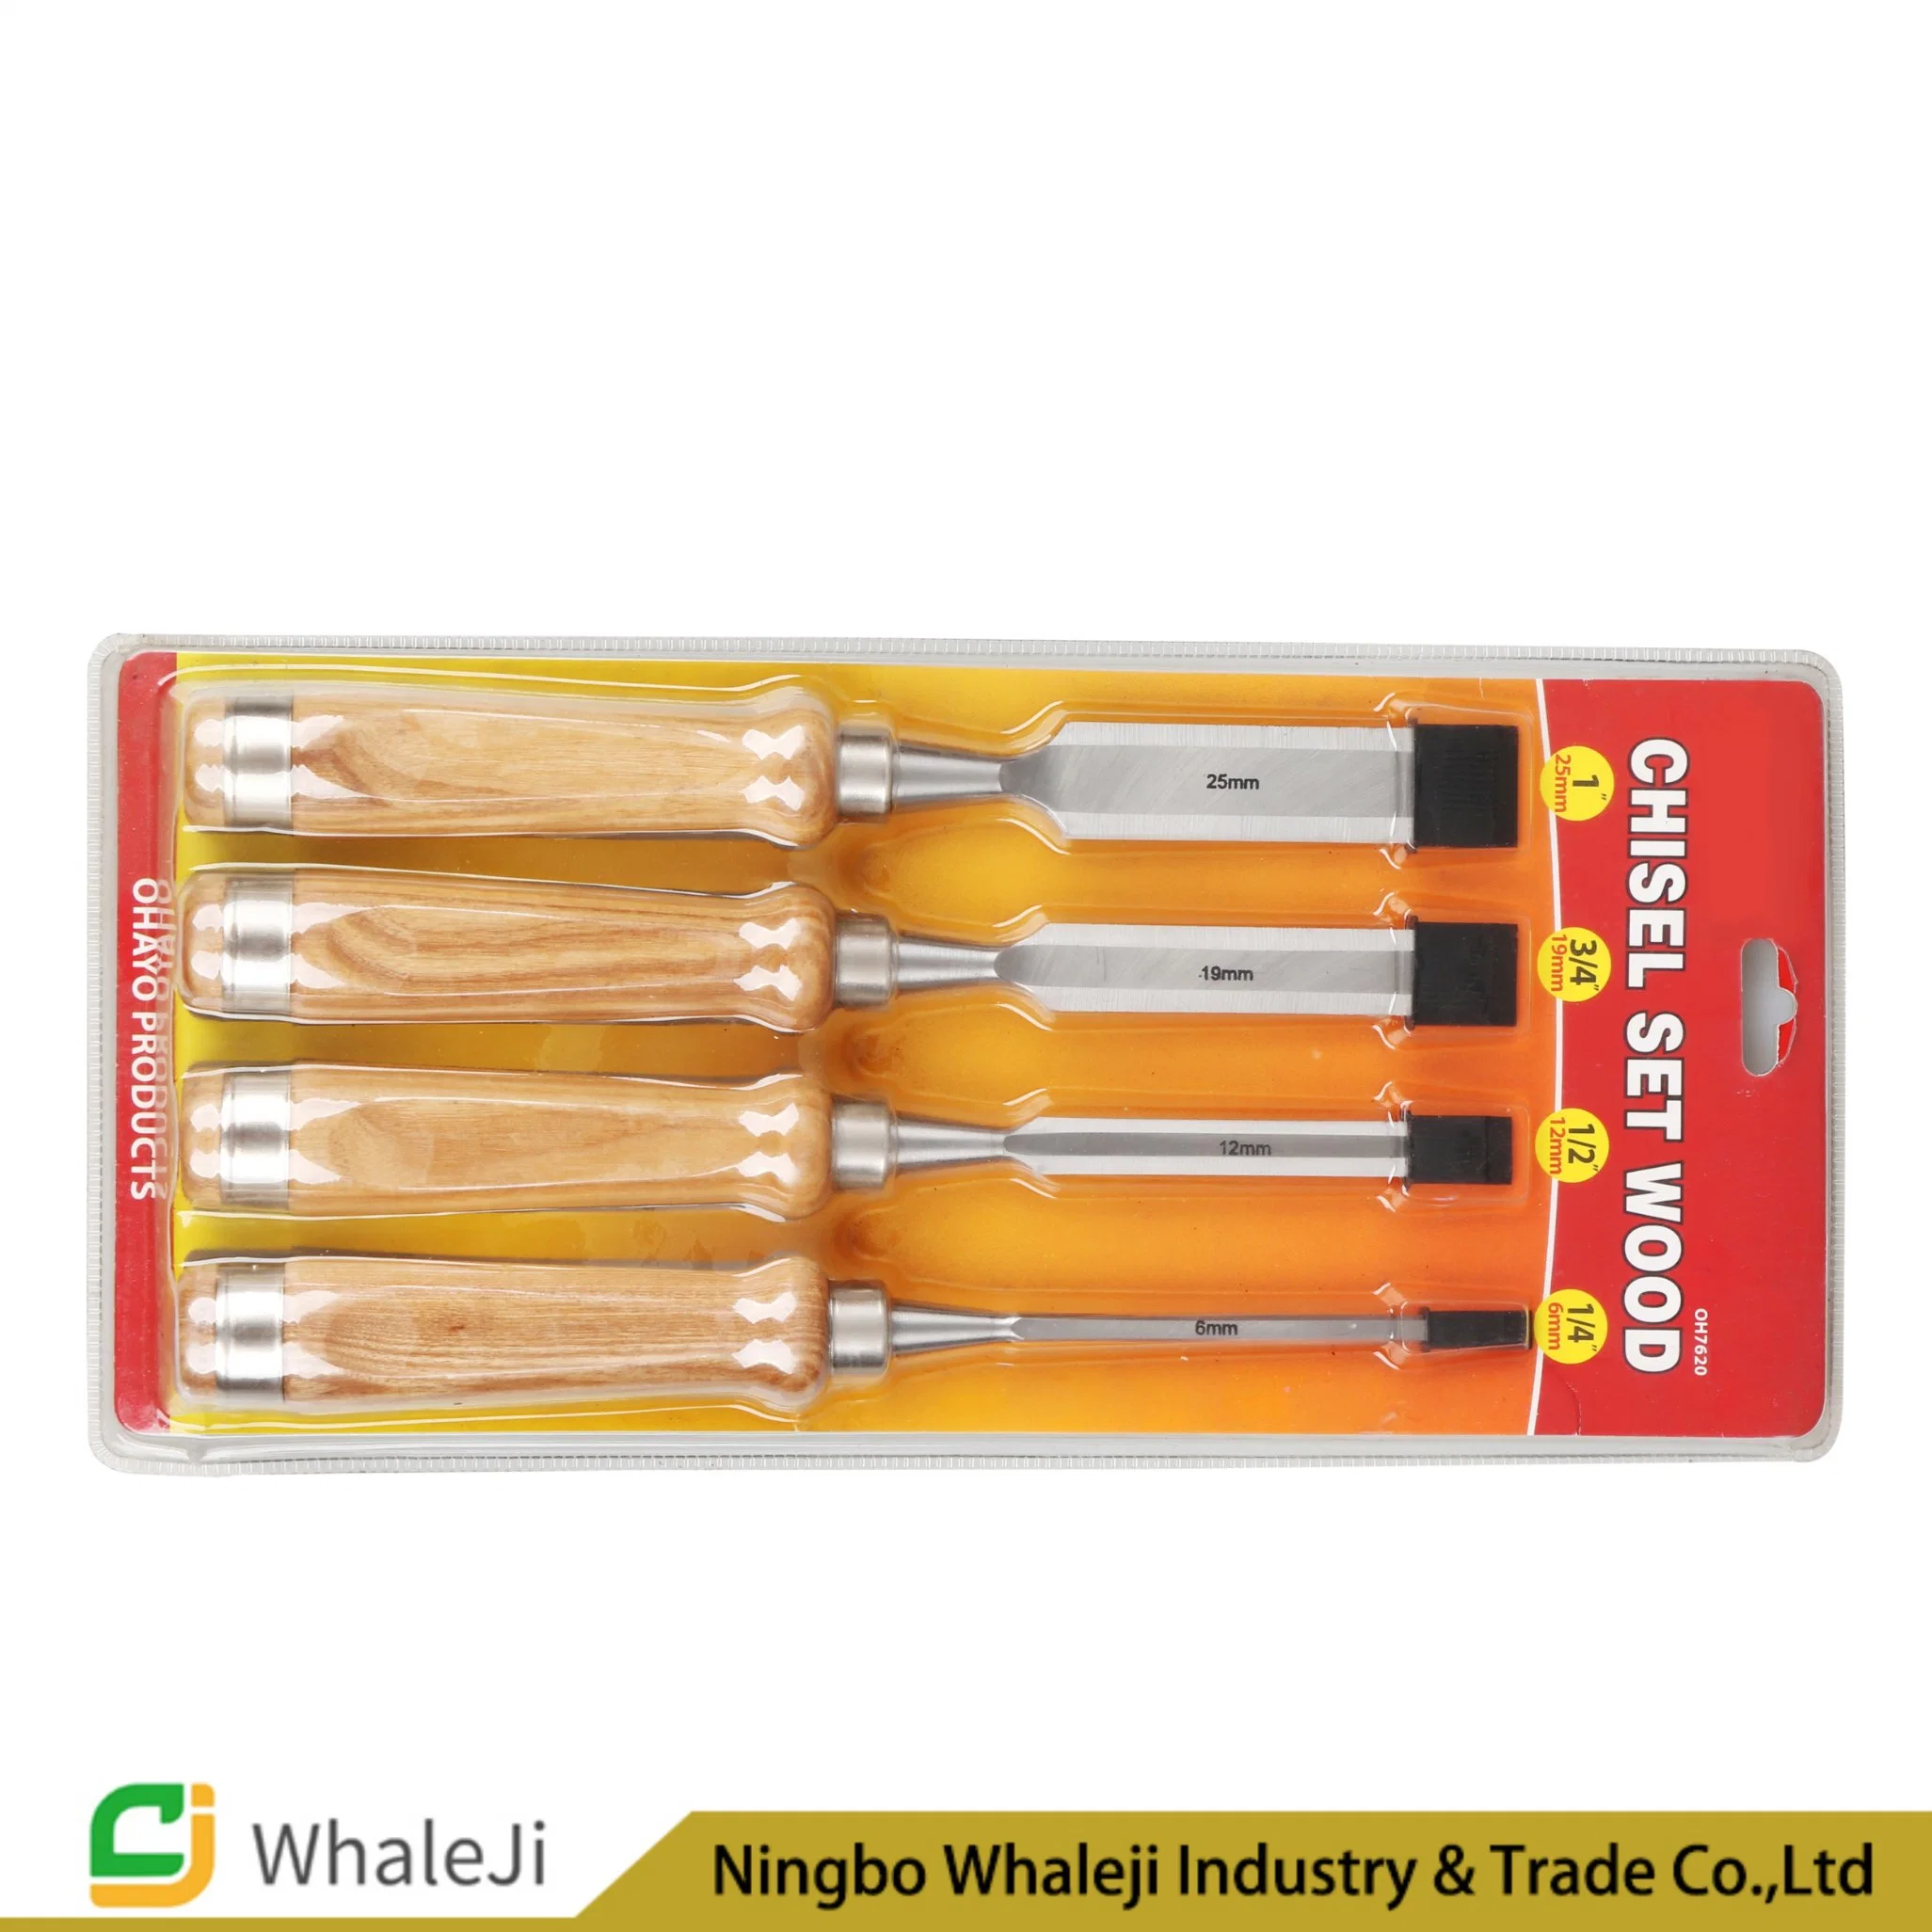 4-Piece Woodworking Chisel Tool Set with Wooden Handle